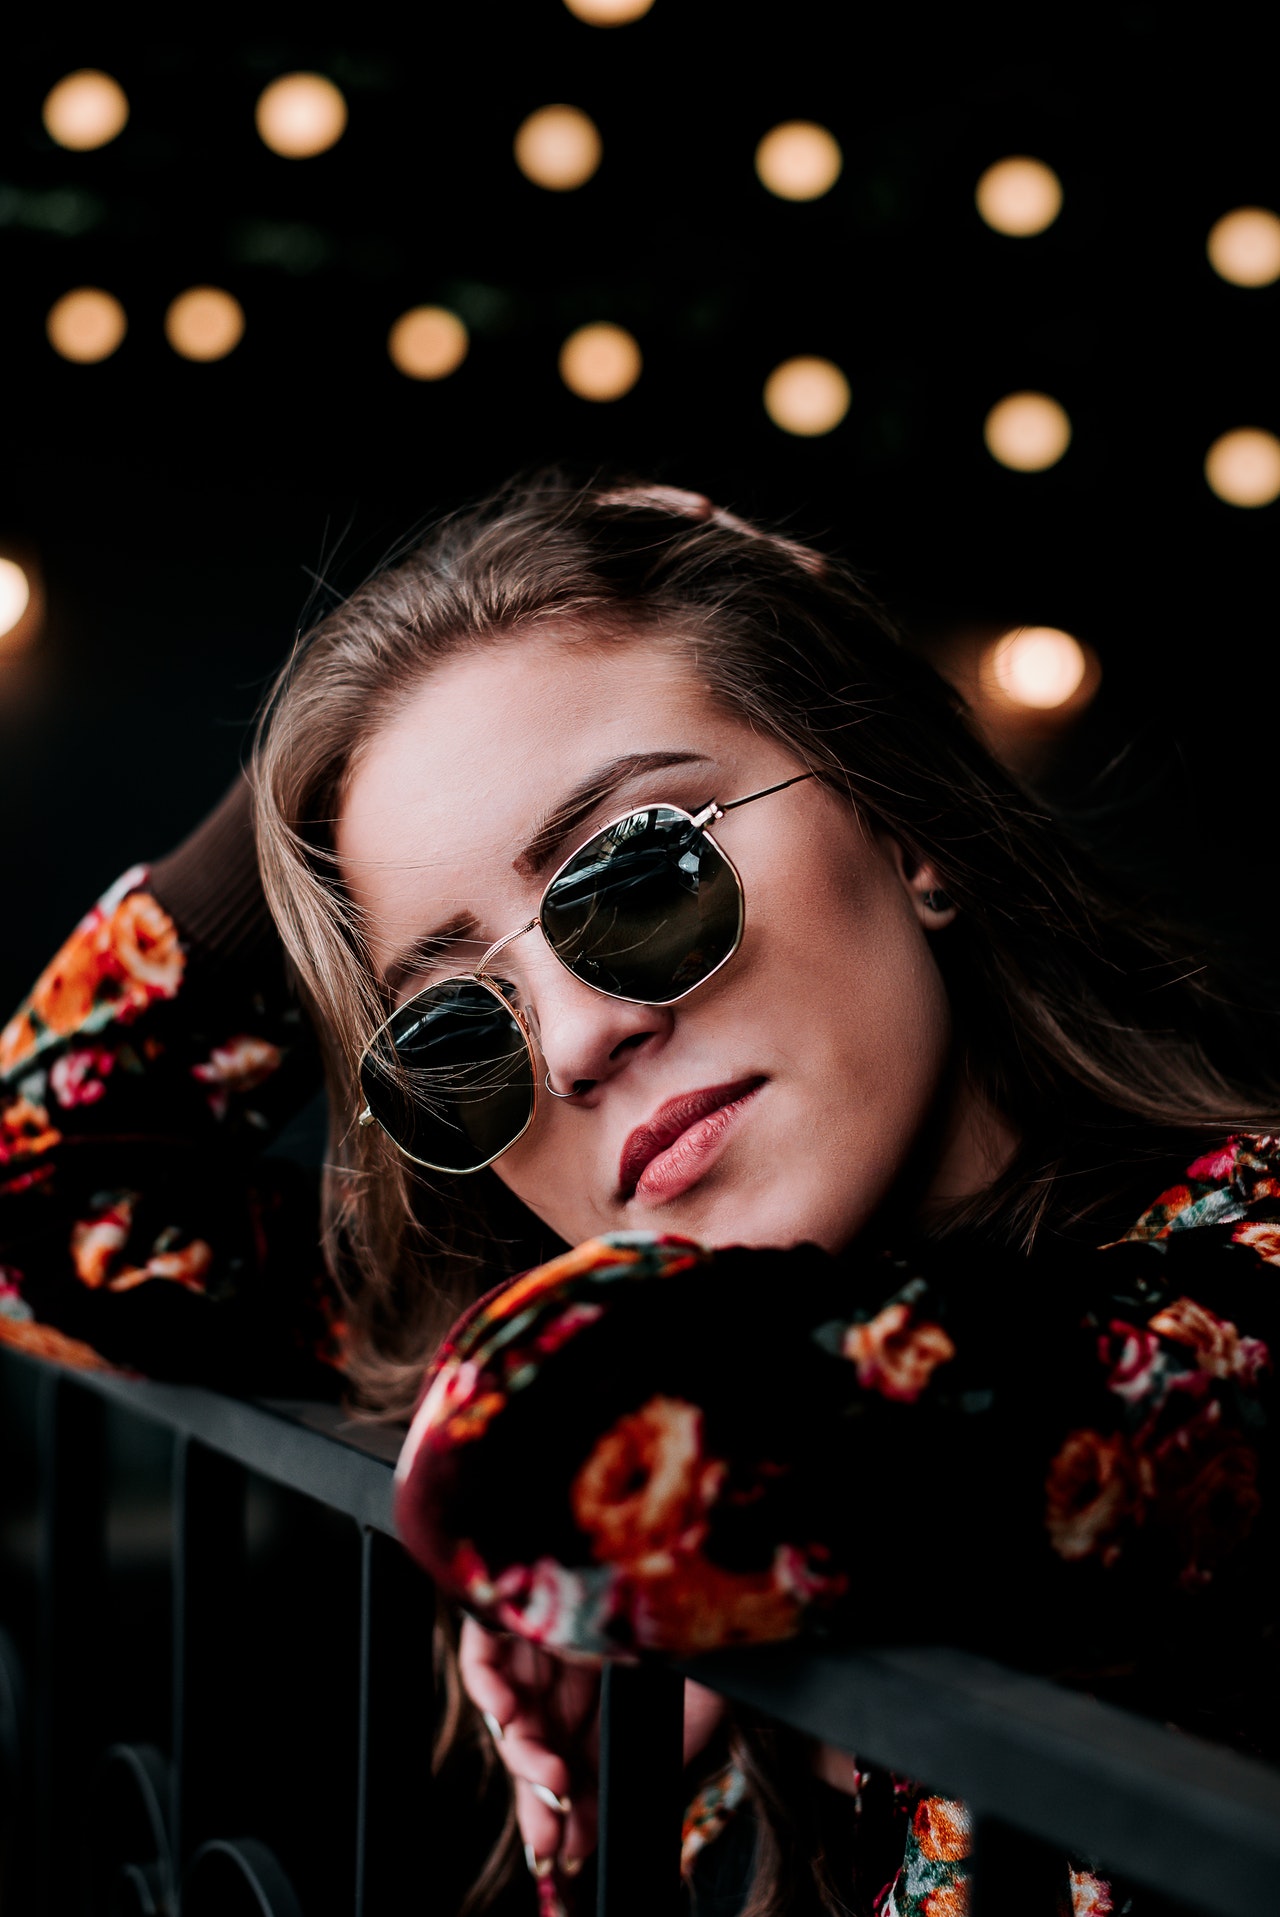 Trendy young lady wearing awesome sunglasses